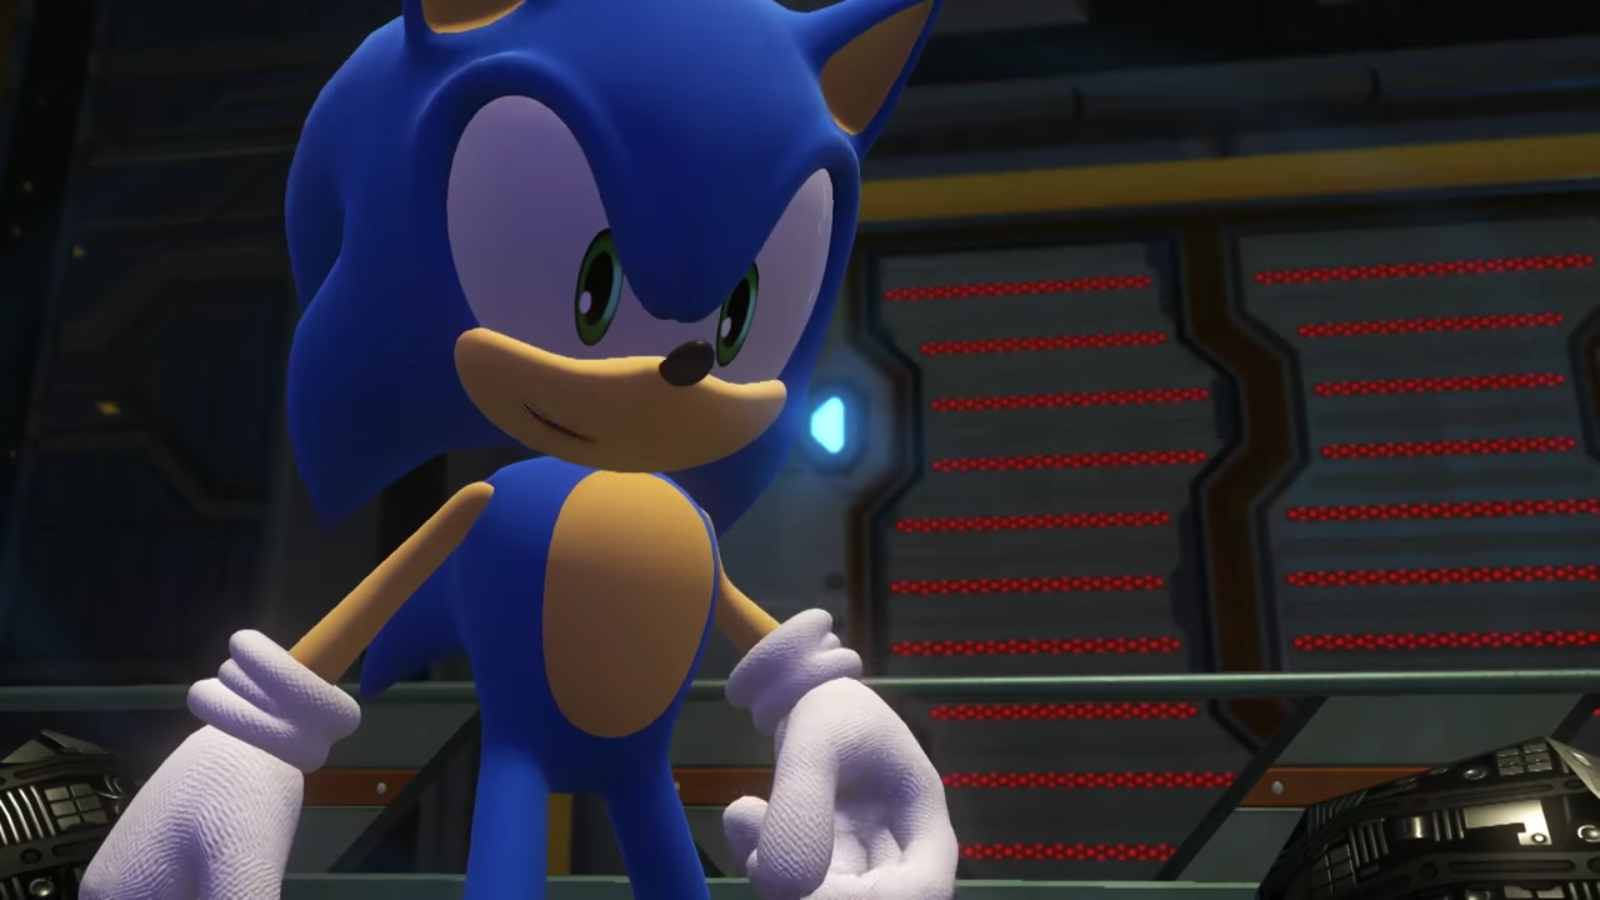 sonic forces model for sonic generations